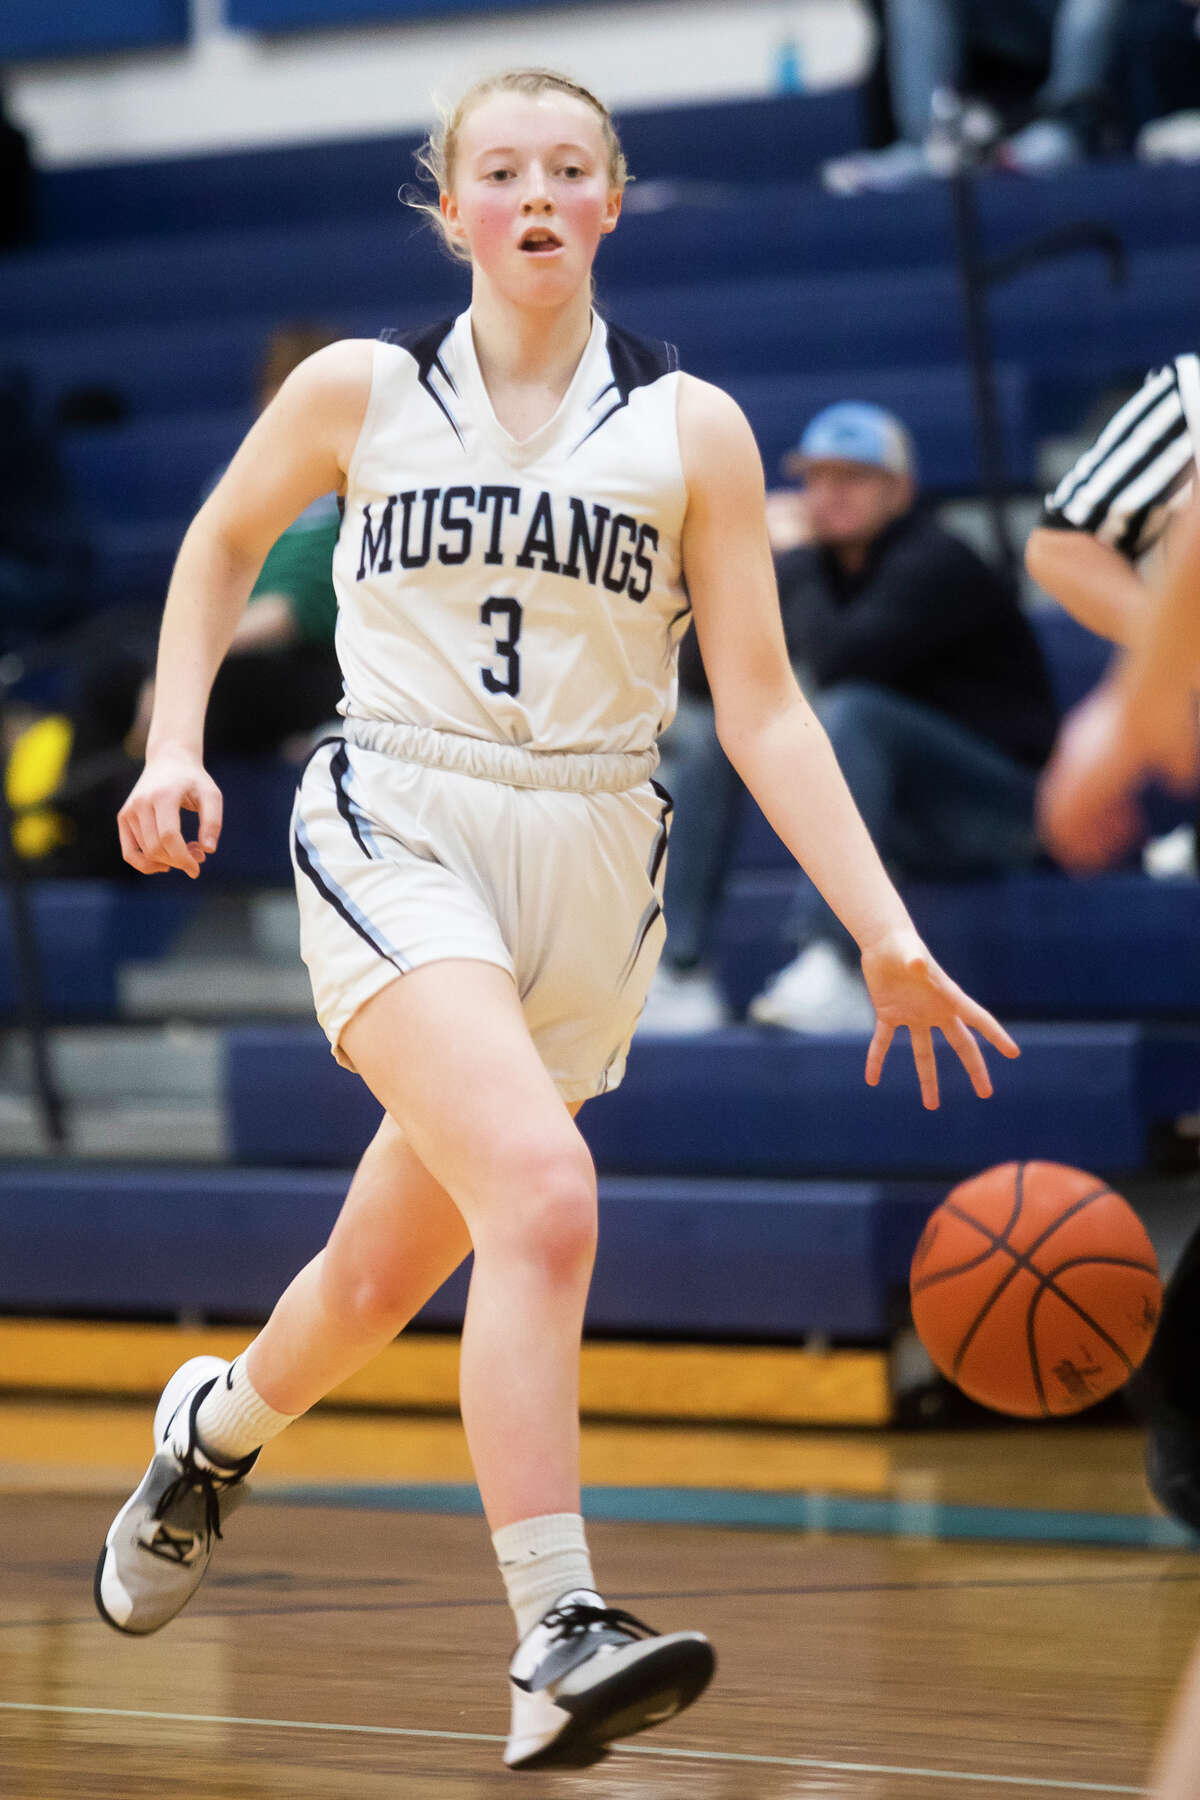 Meridian's Halen McLaughlin dribbles down the court during a game against Beaverton Tuesday, Feb. 1, 2022 at Meridian Early College High School.